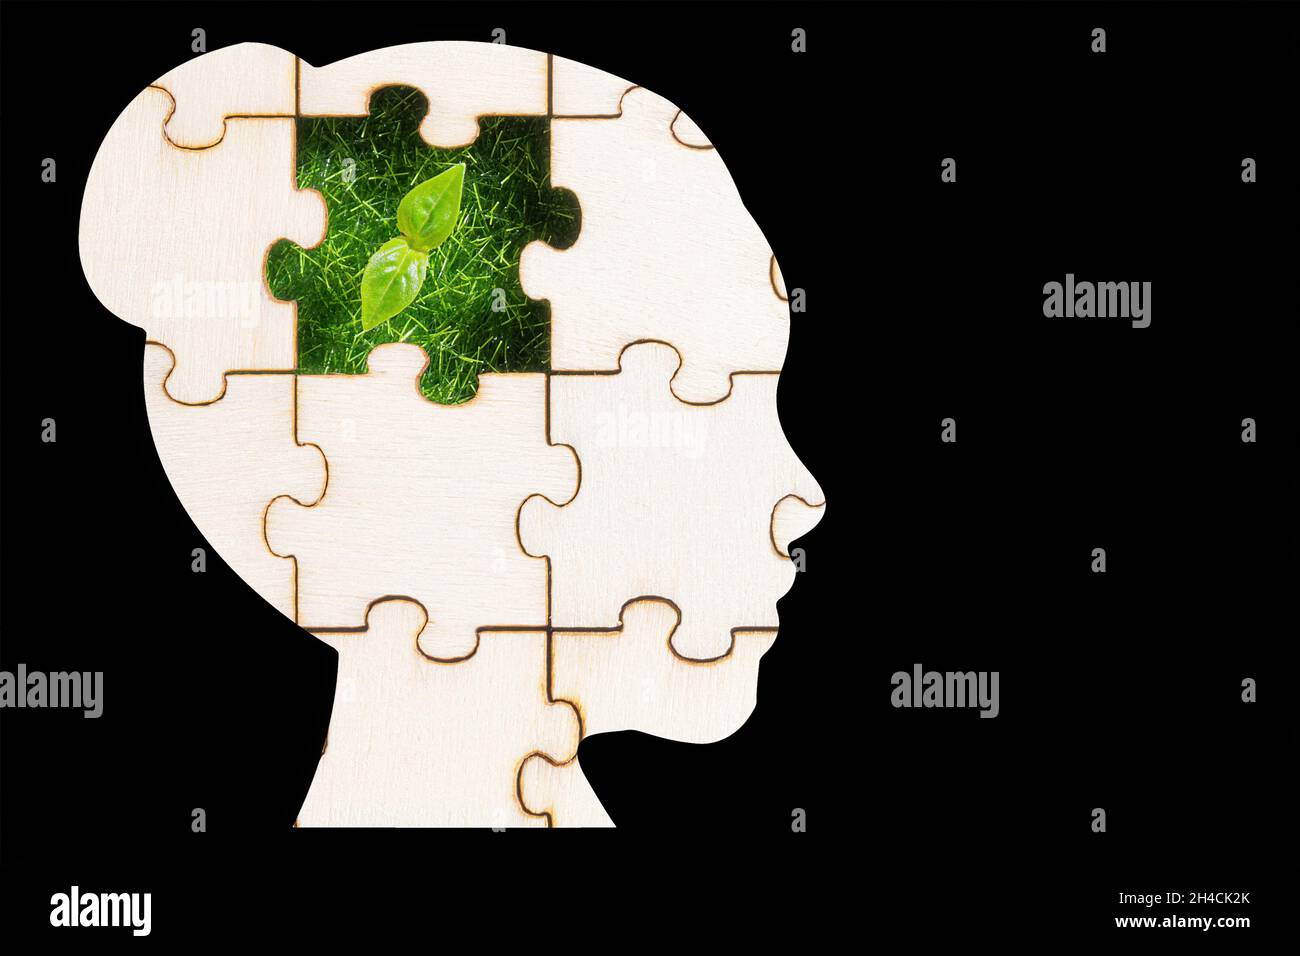 Woman's head profile shaped jigsaw puzzle with a green sprout visible through the missing piece. The concept of planting an idea in someone's mind. Stock Photo